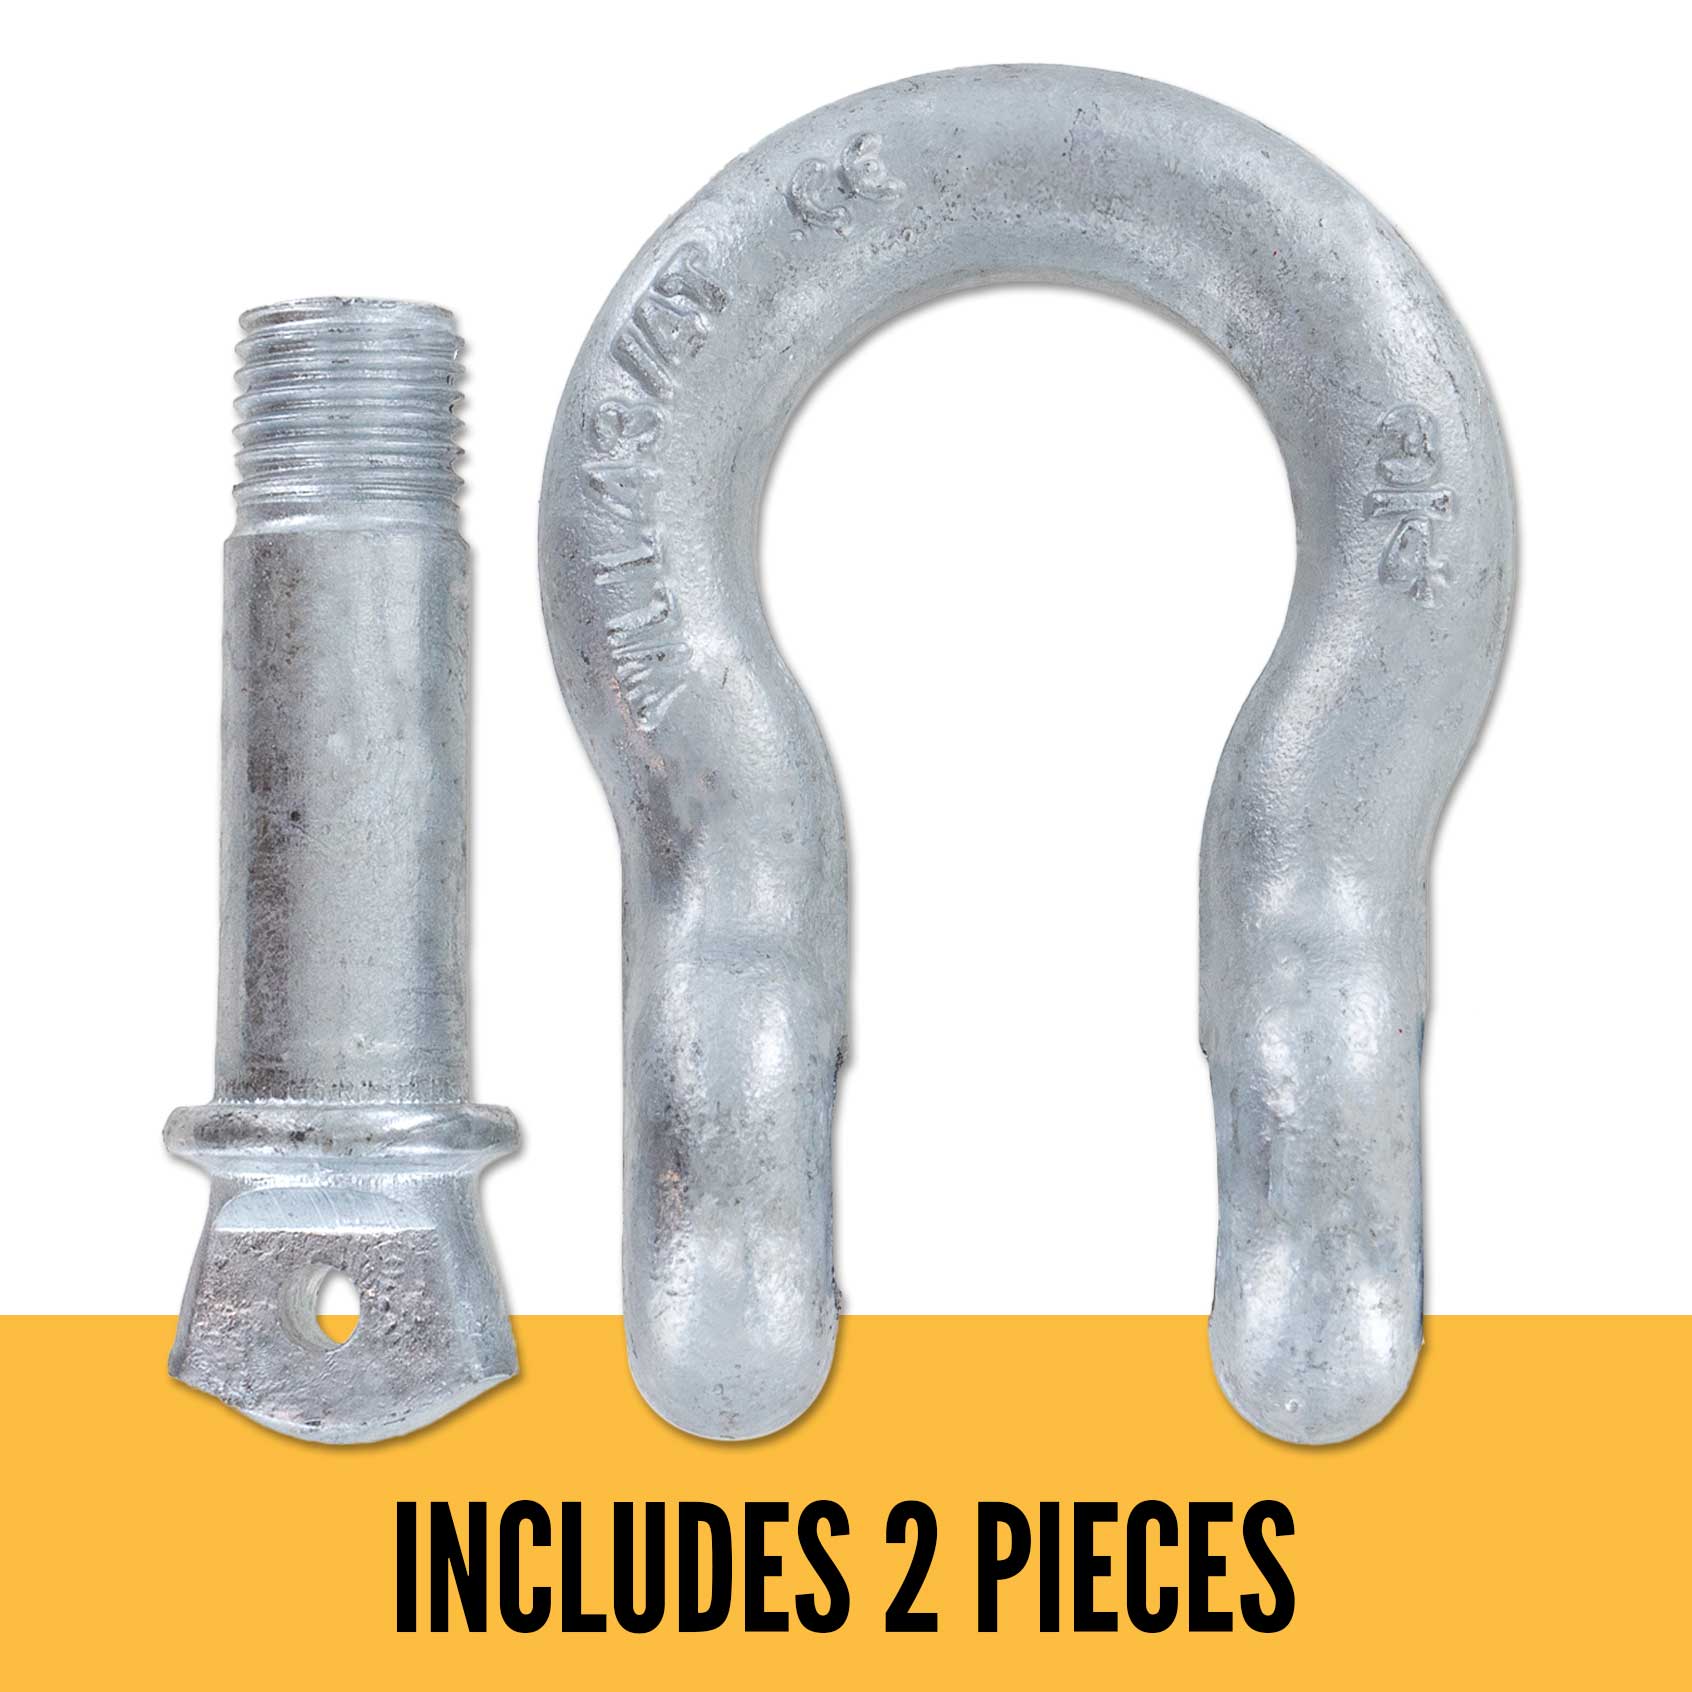 1-3/4" Galvanized Screw Pin Anchor Shackle - 25 Ton parts of a shackle